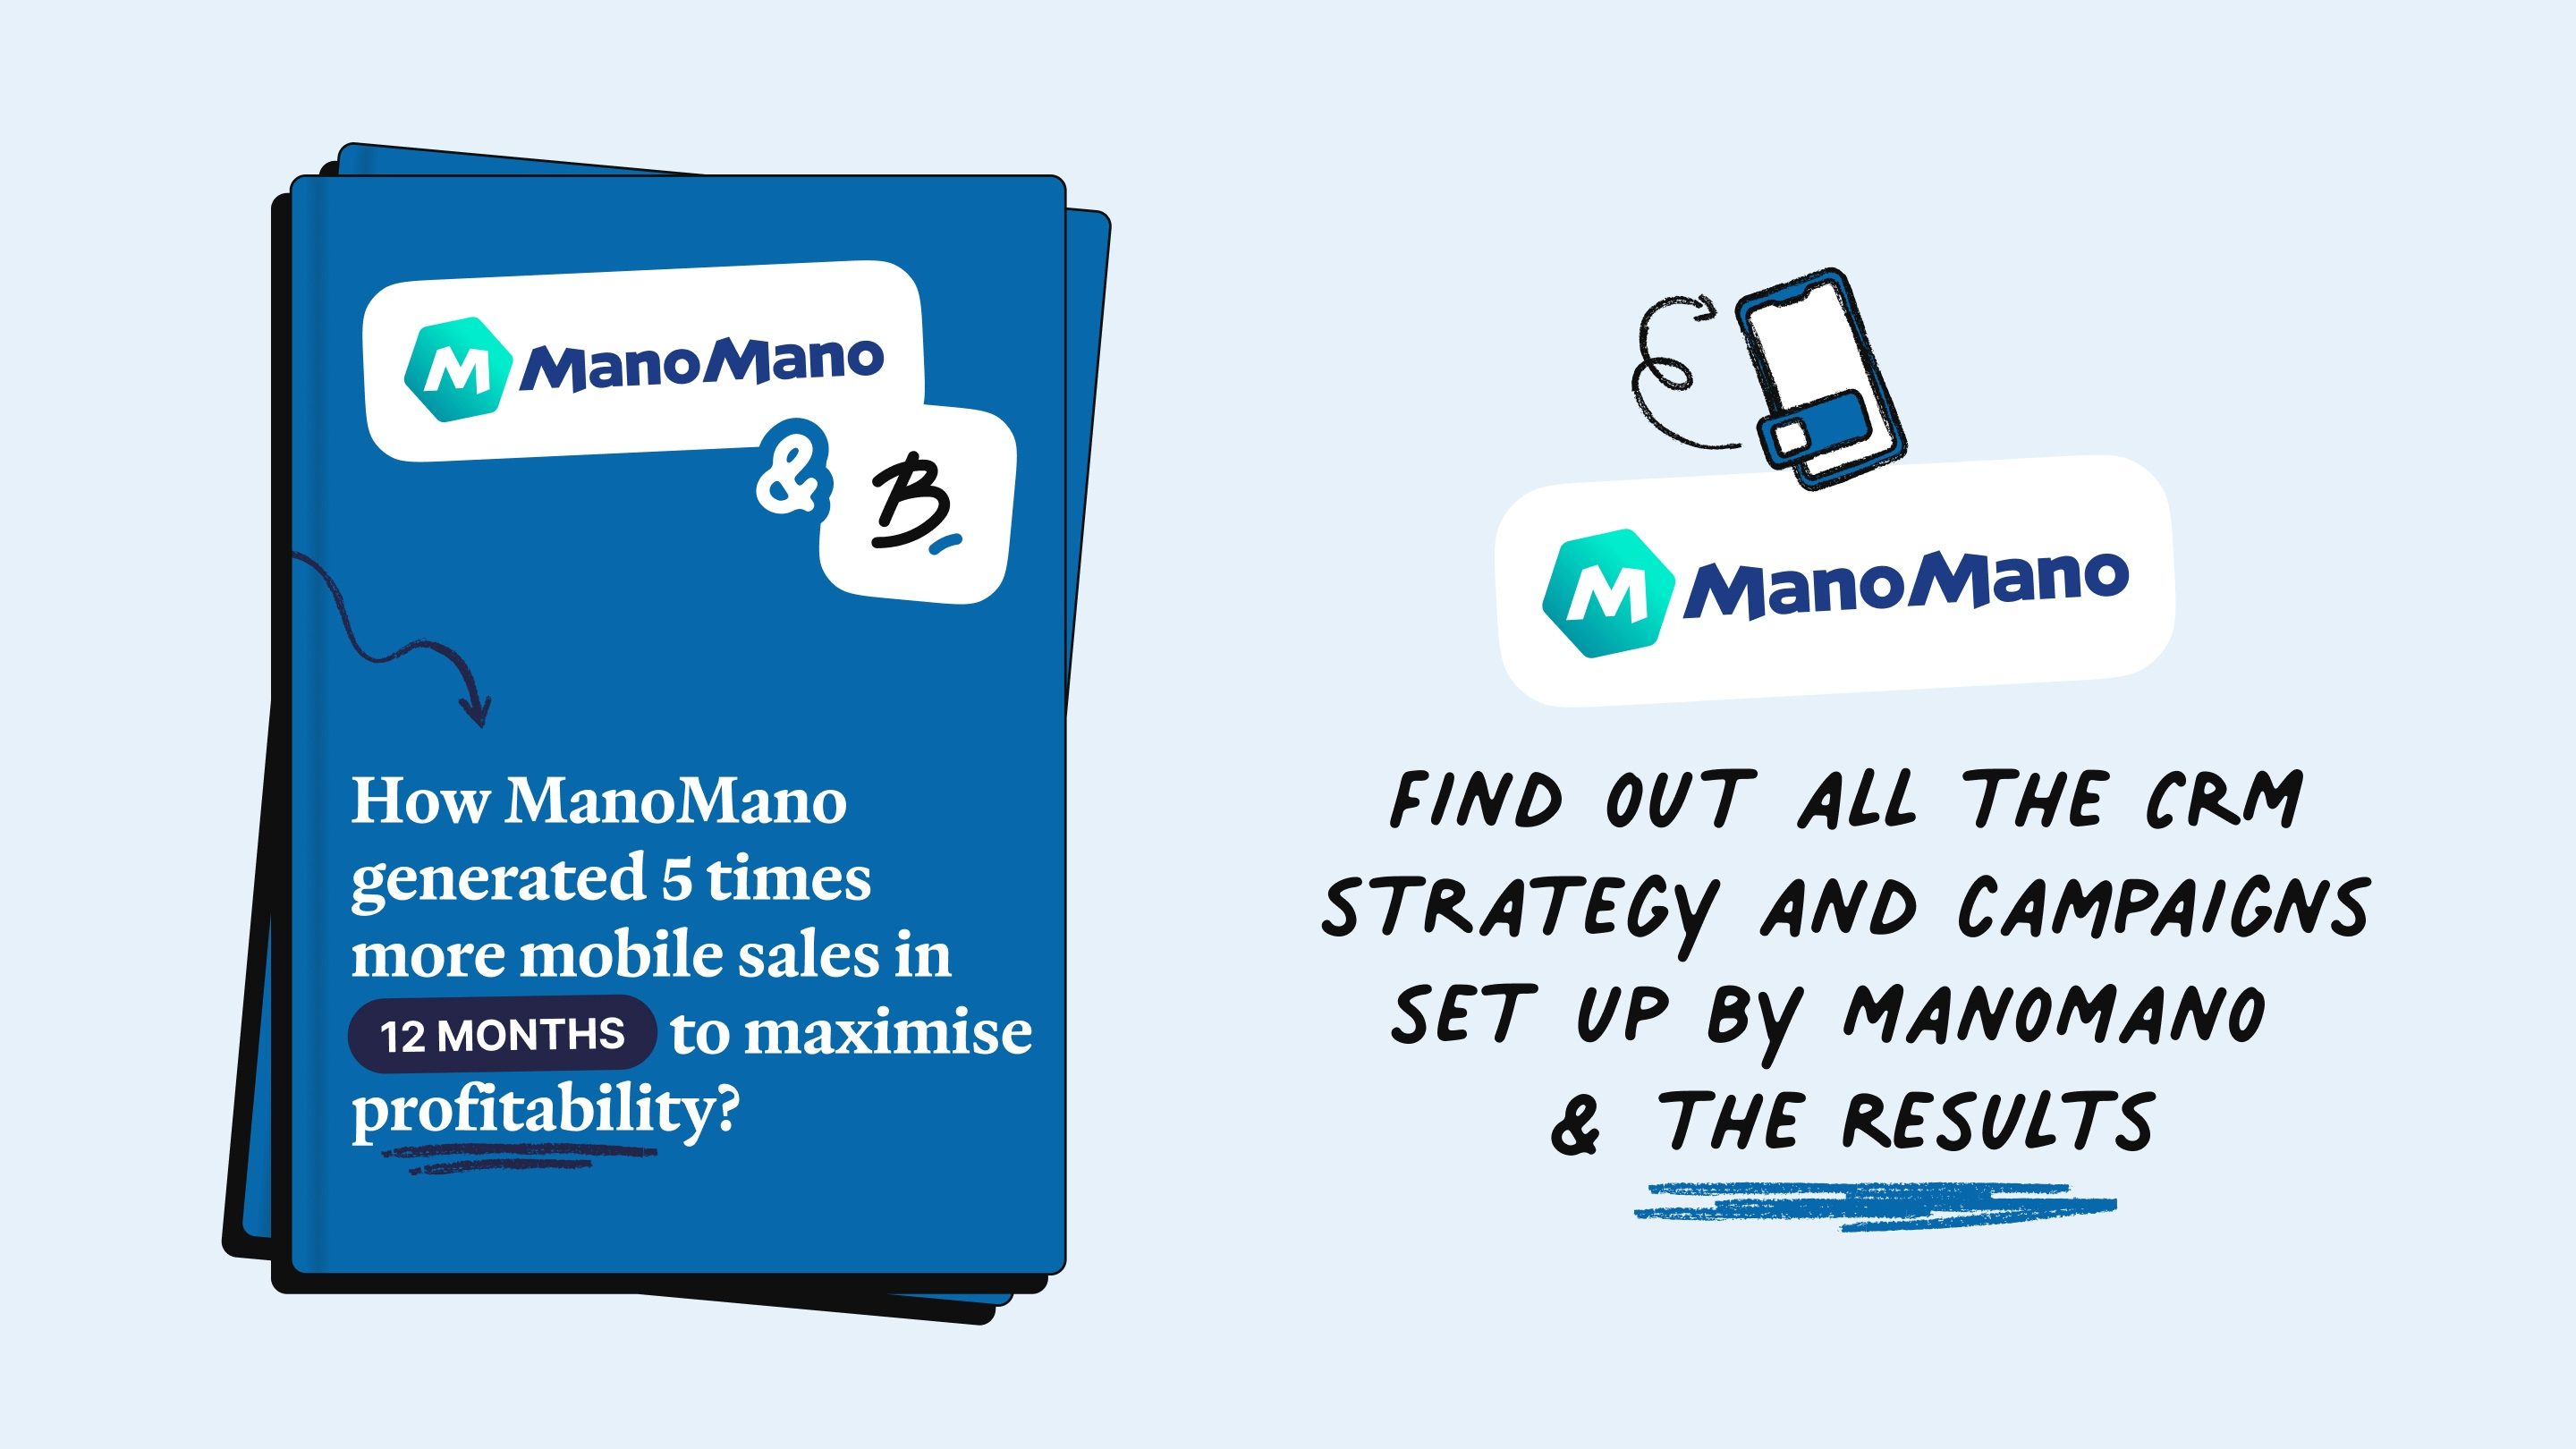 How ManoMano generated five times more mobile sales in 12 months to maximise profitability